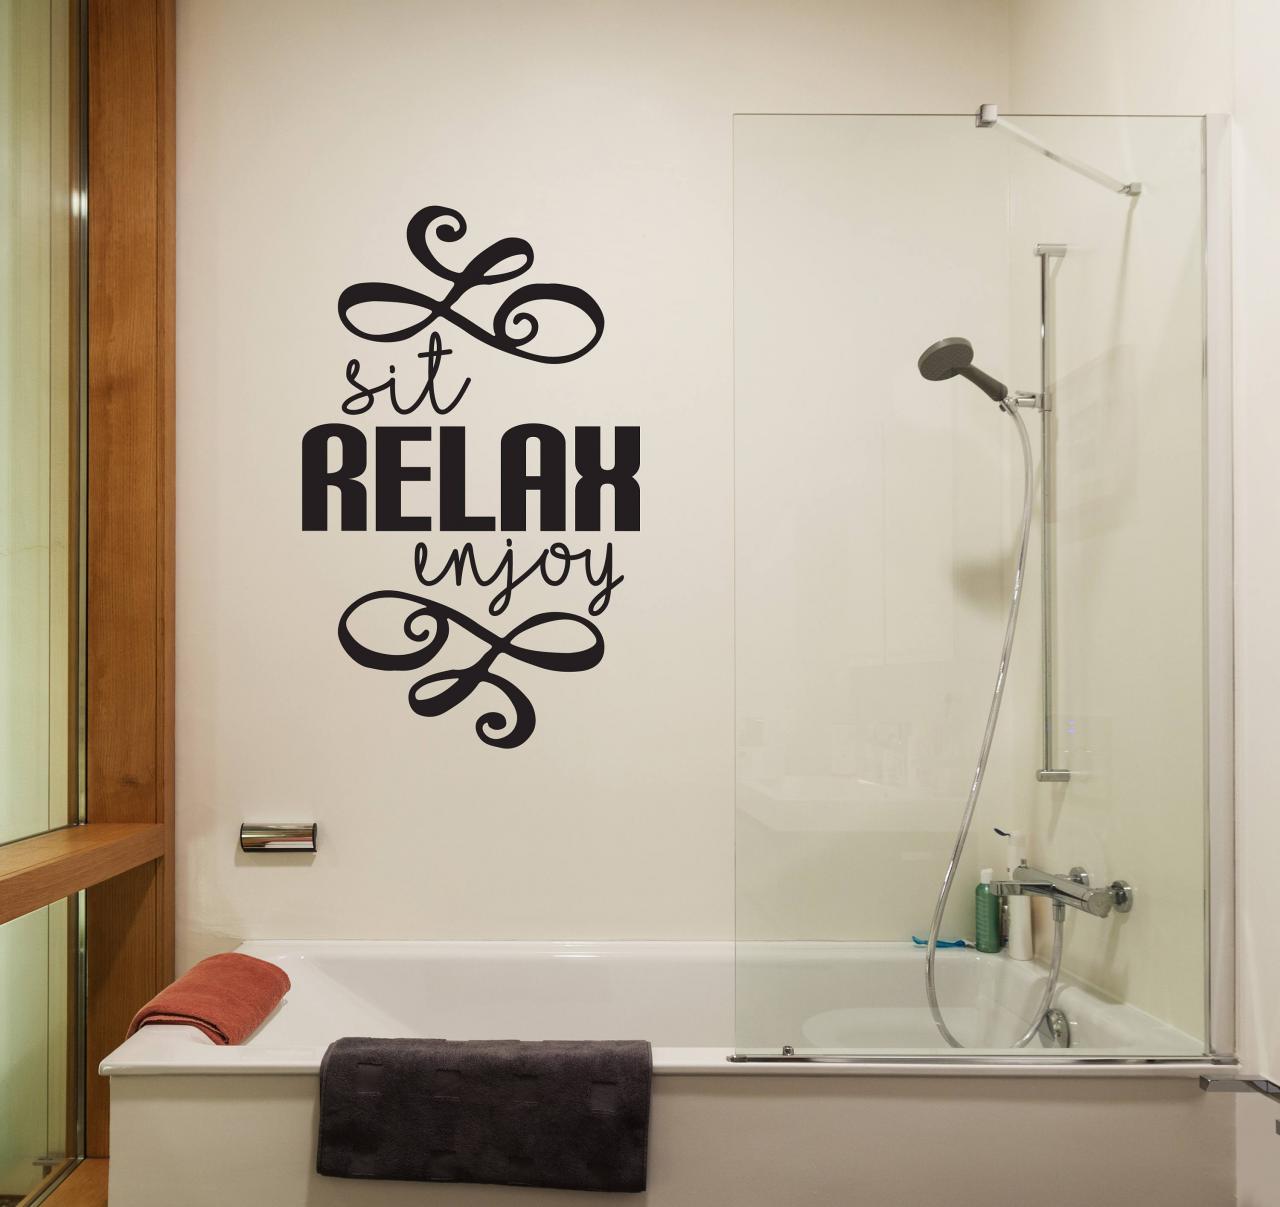 Bathroom Wall Decor Vinyl Decal Quote Relax Sticker for Etsy